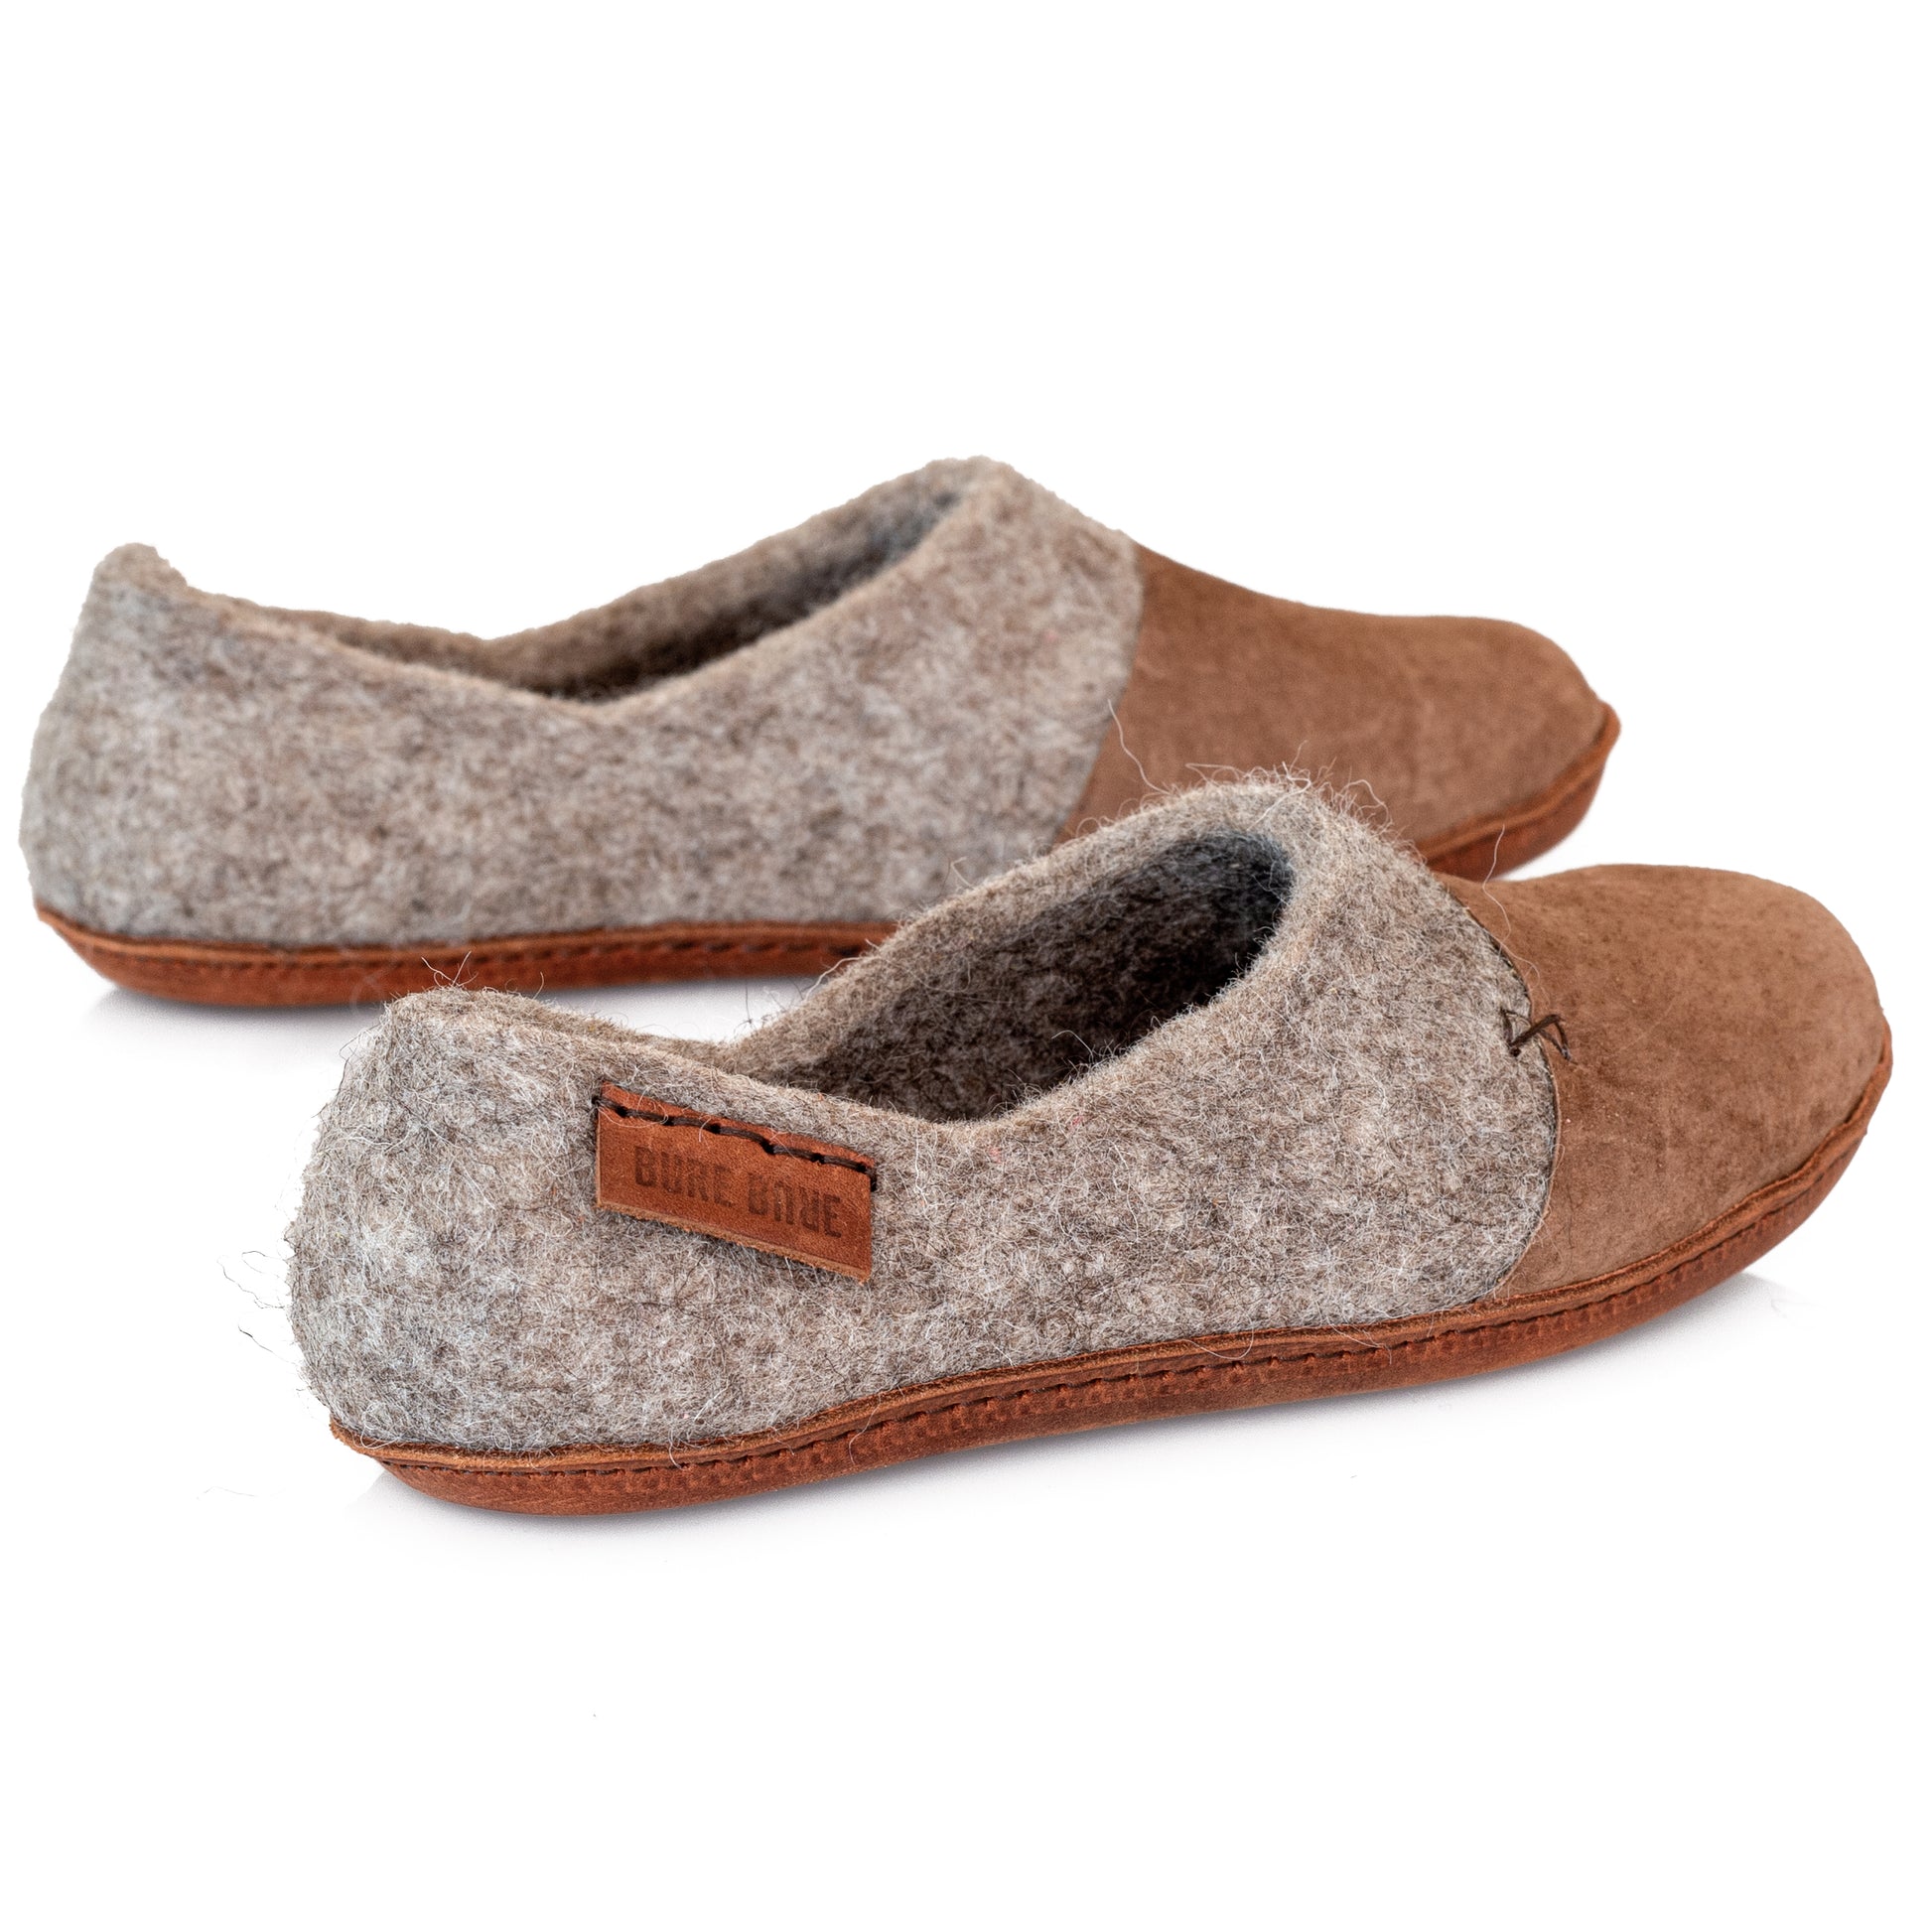 WOOCAPS  Felted Clogs with Suede Toe Caps, Wool Slippers for Men from Undyed Natural Beige Sheep Wool. 